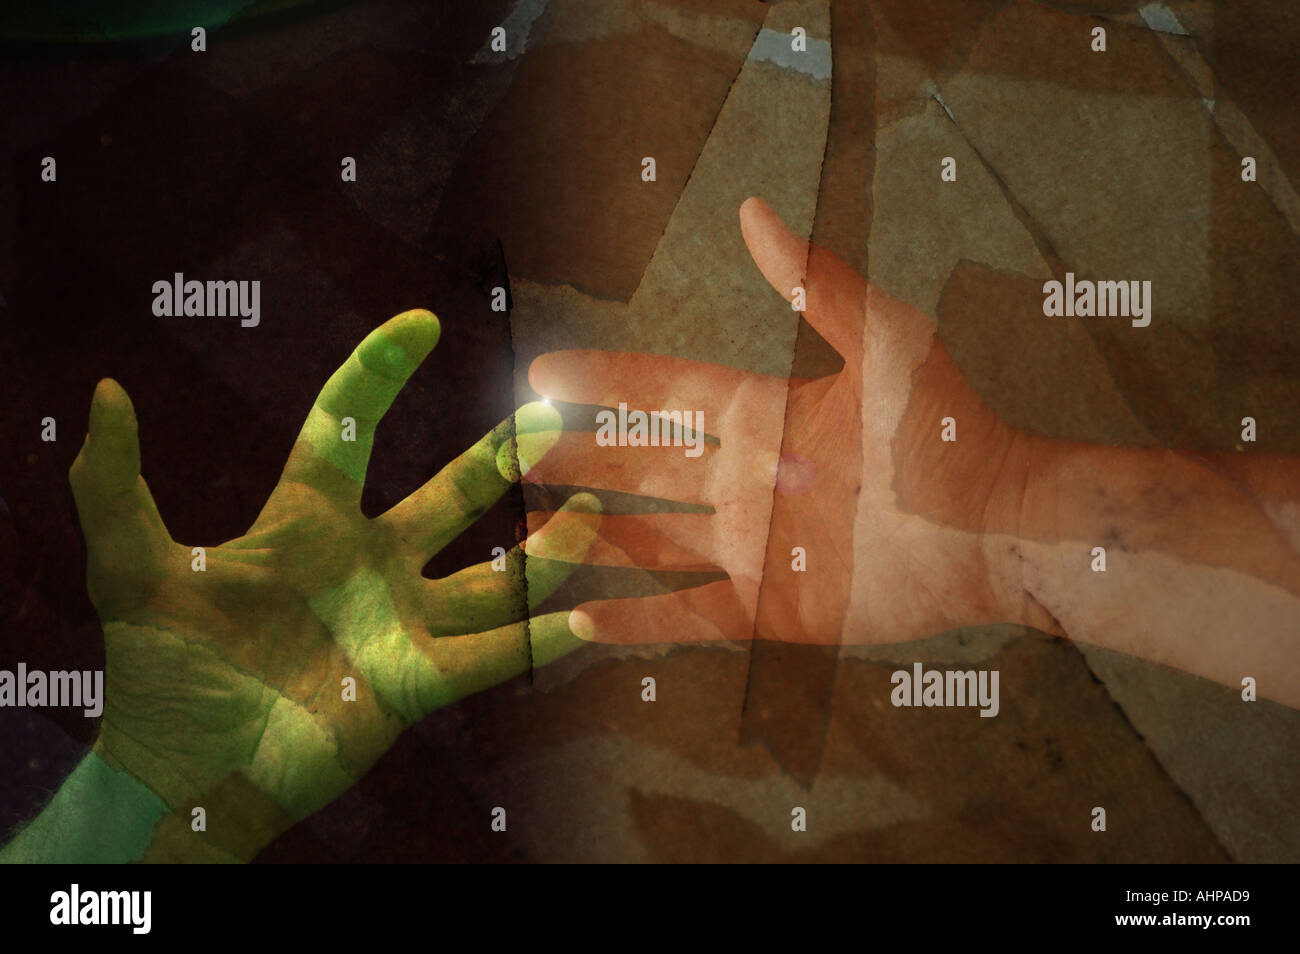 Hands reaching grasping collage technology concept Stock Photo